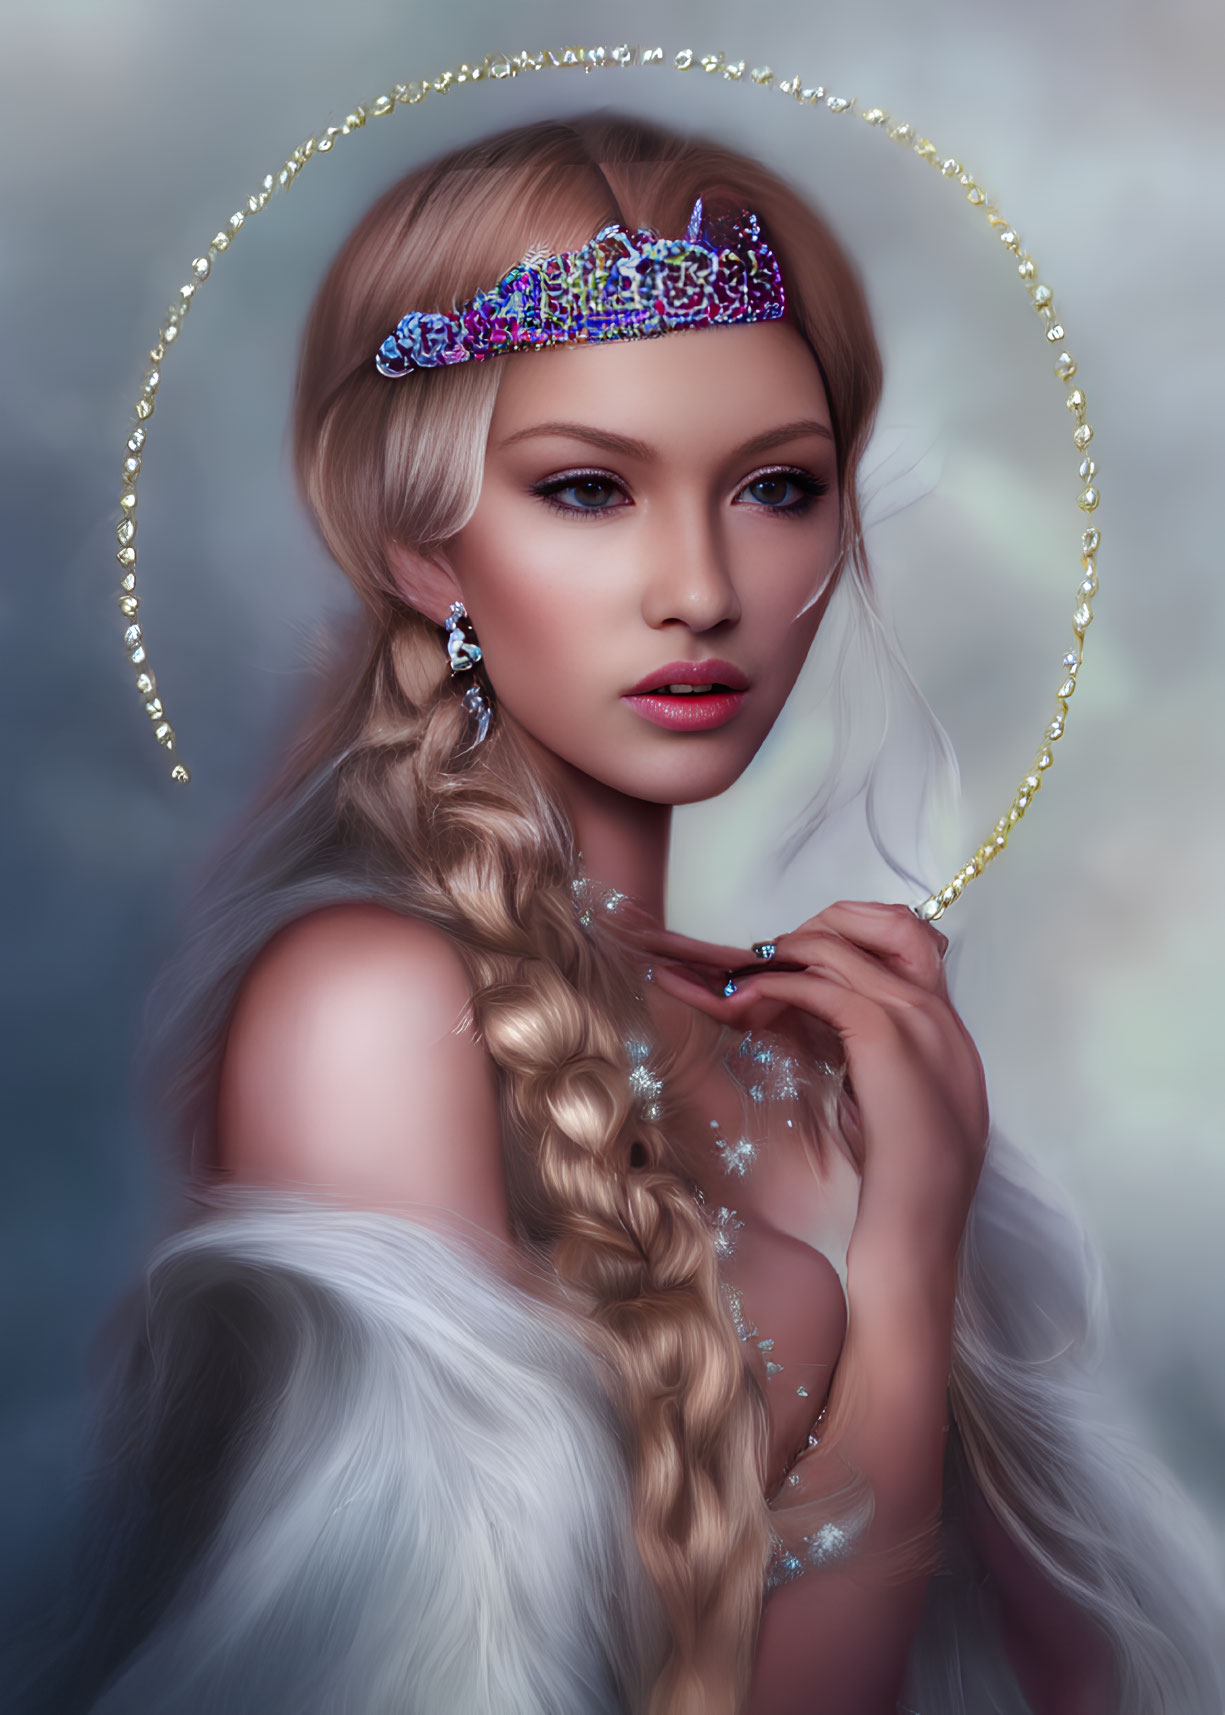 Digital portrait of a woman with braided hairstyle, sparkling headband, and white fur-like garment on